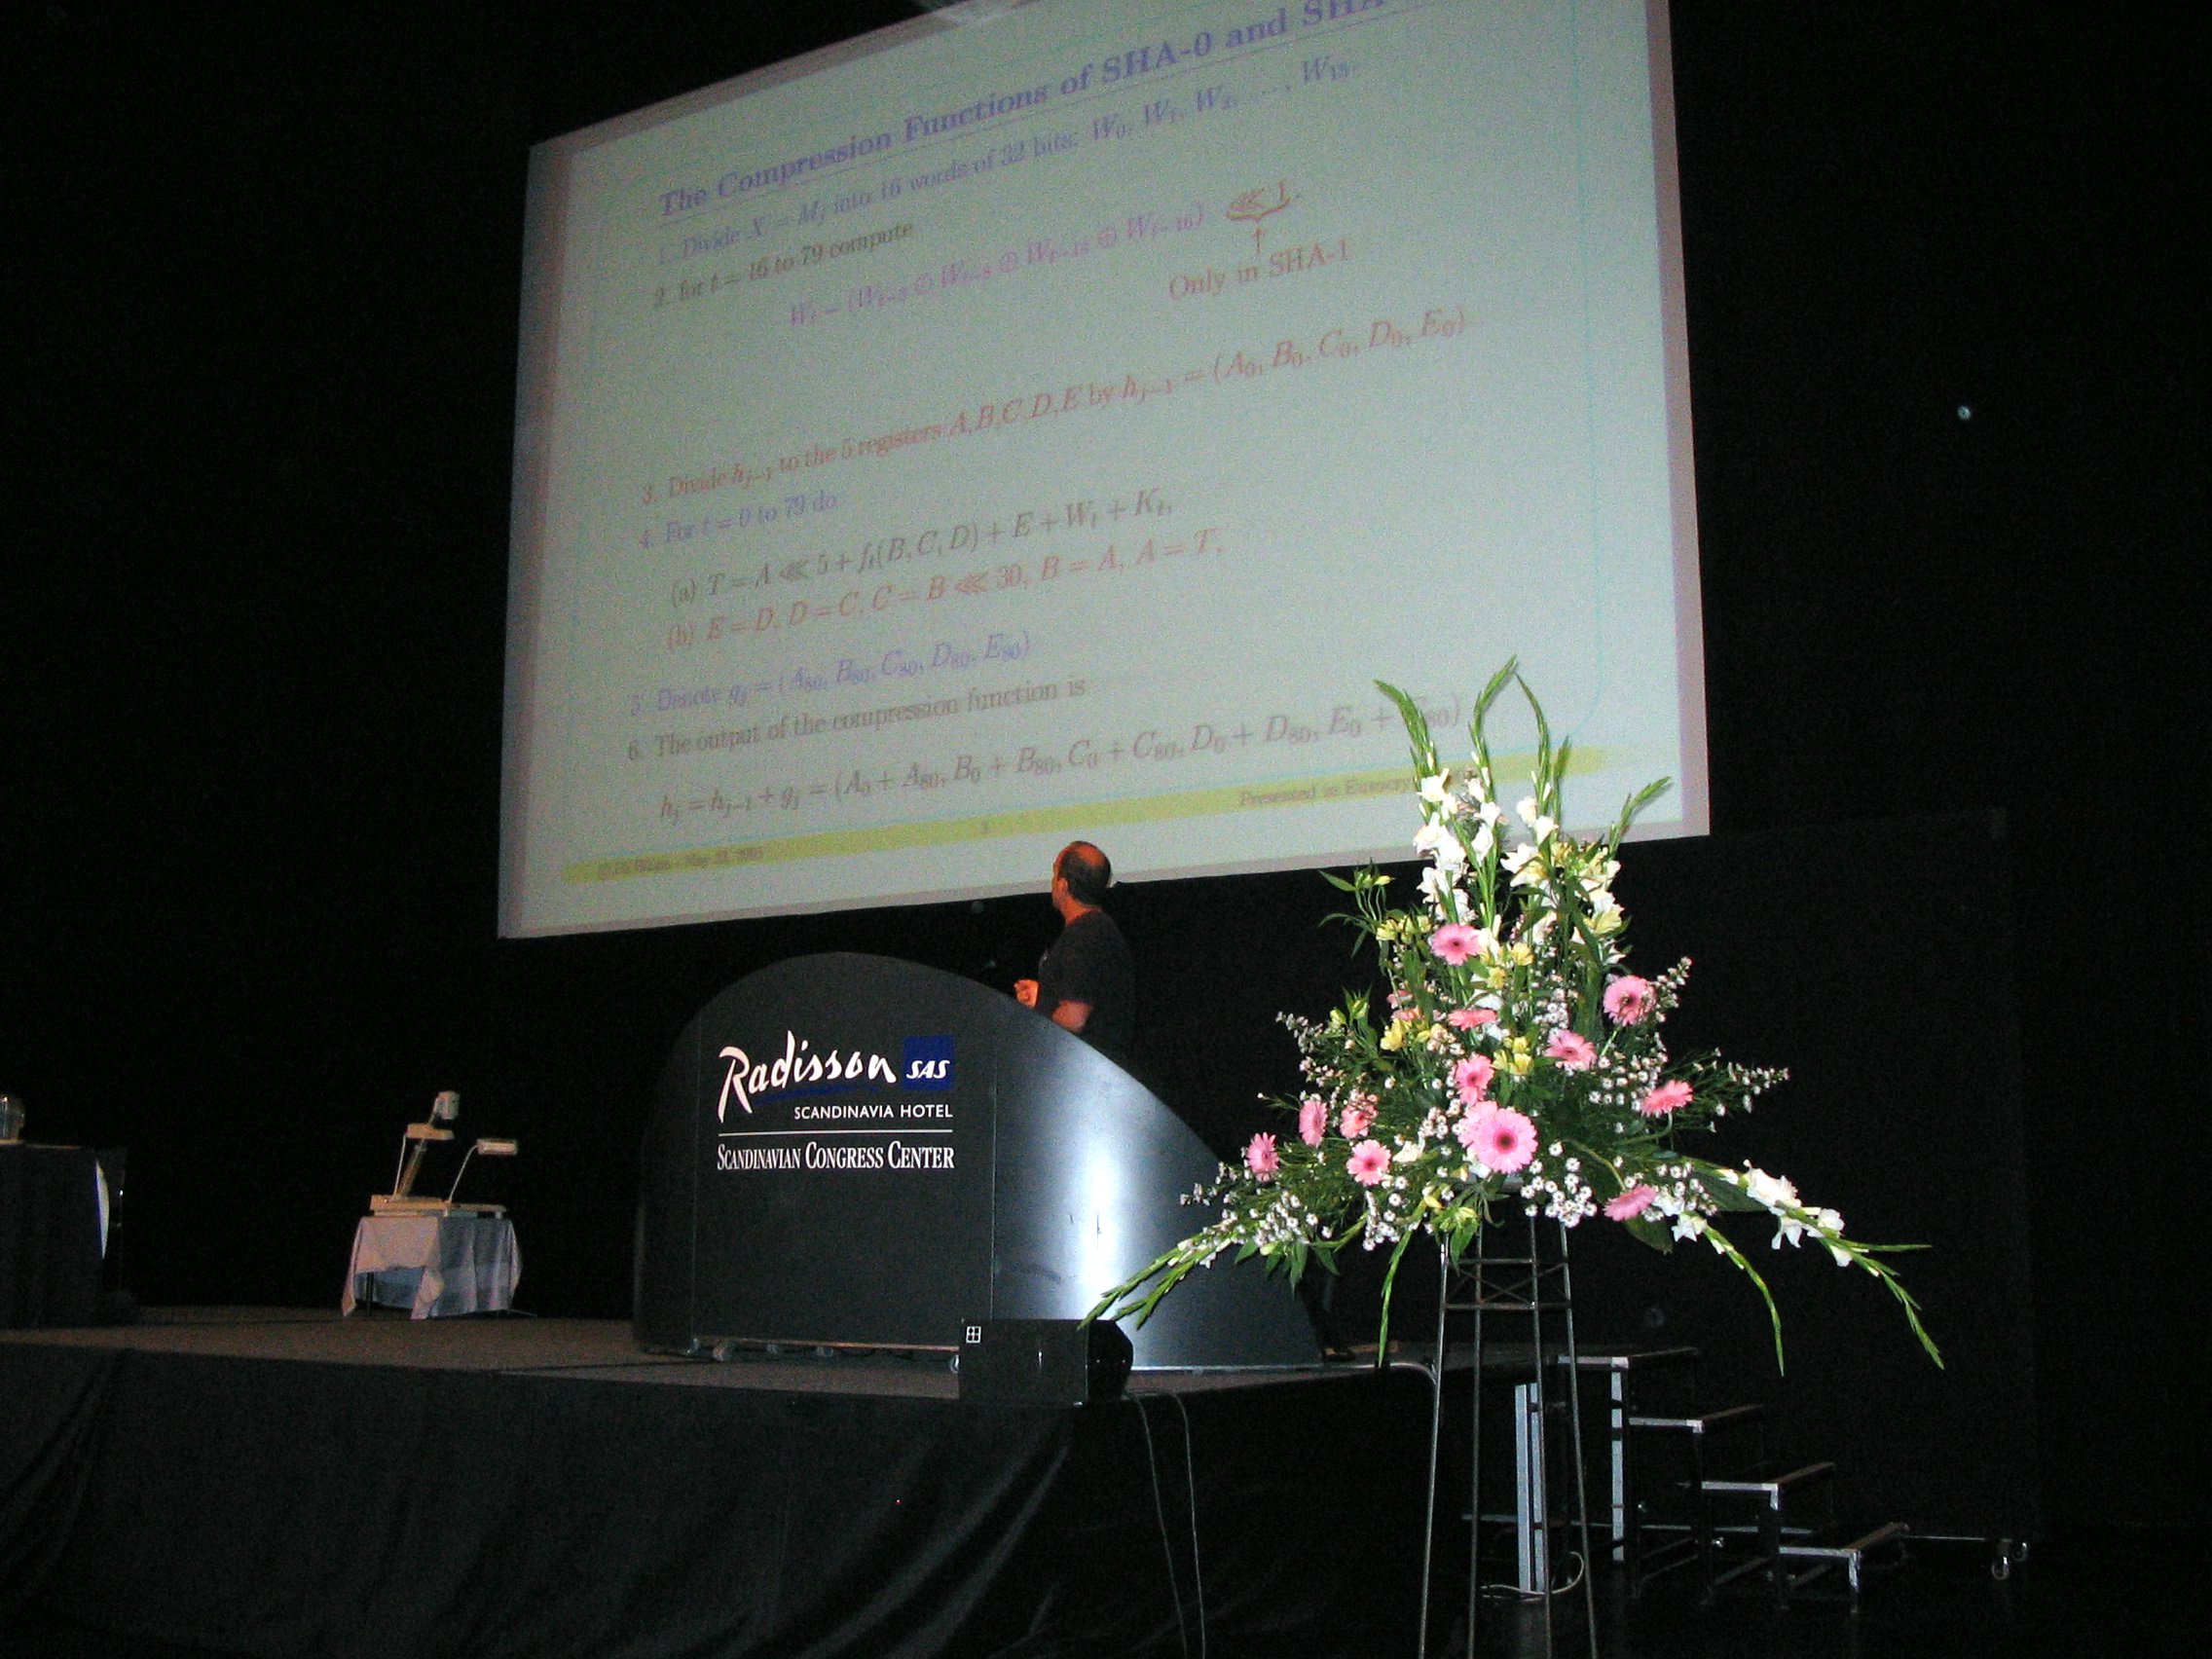 Picture from EuroCrypt 05